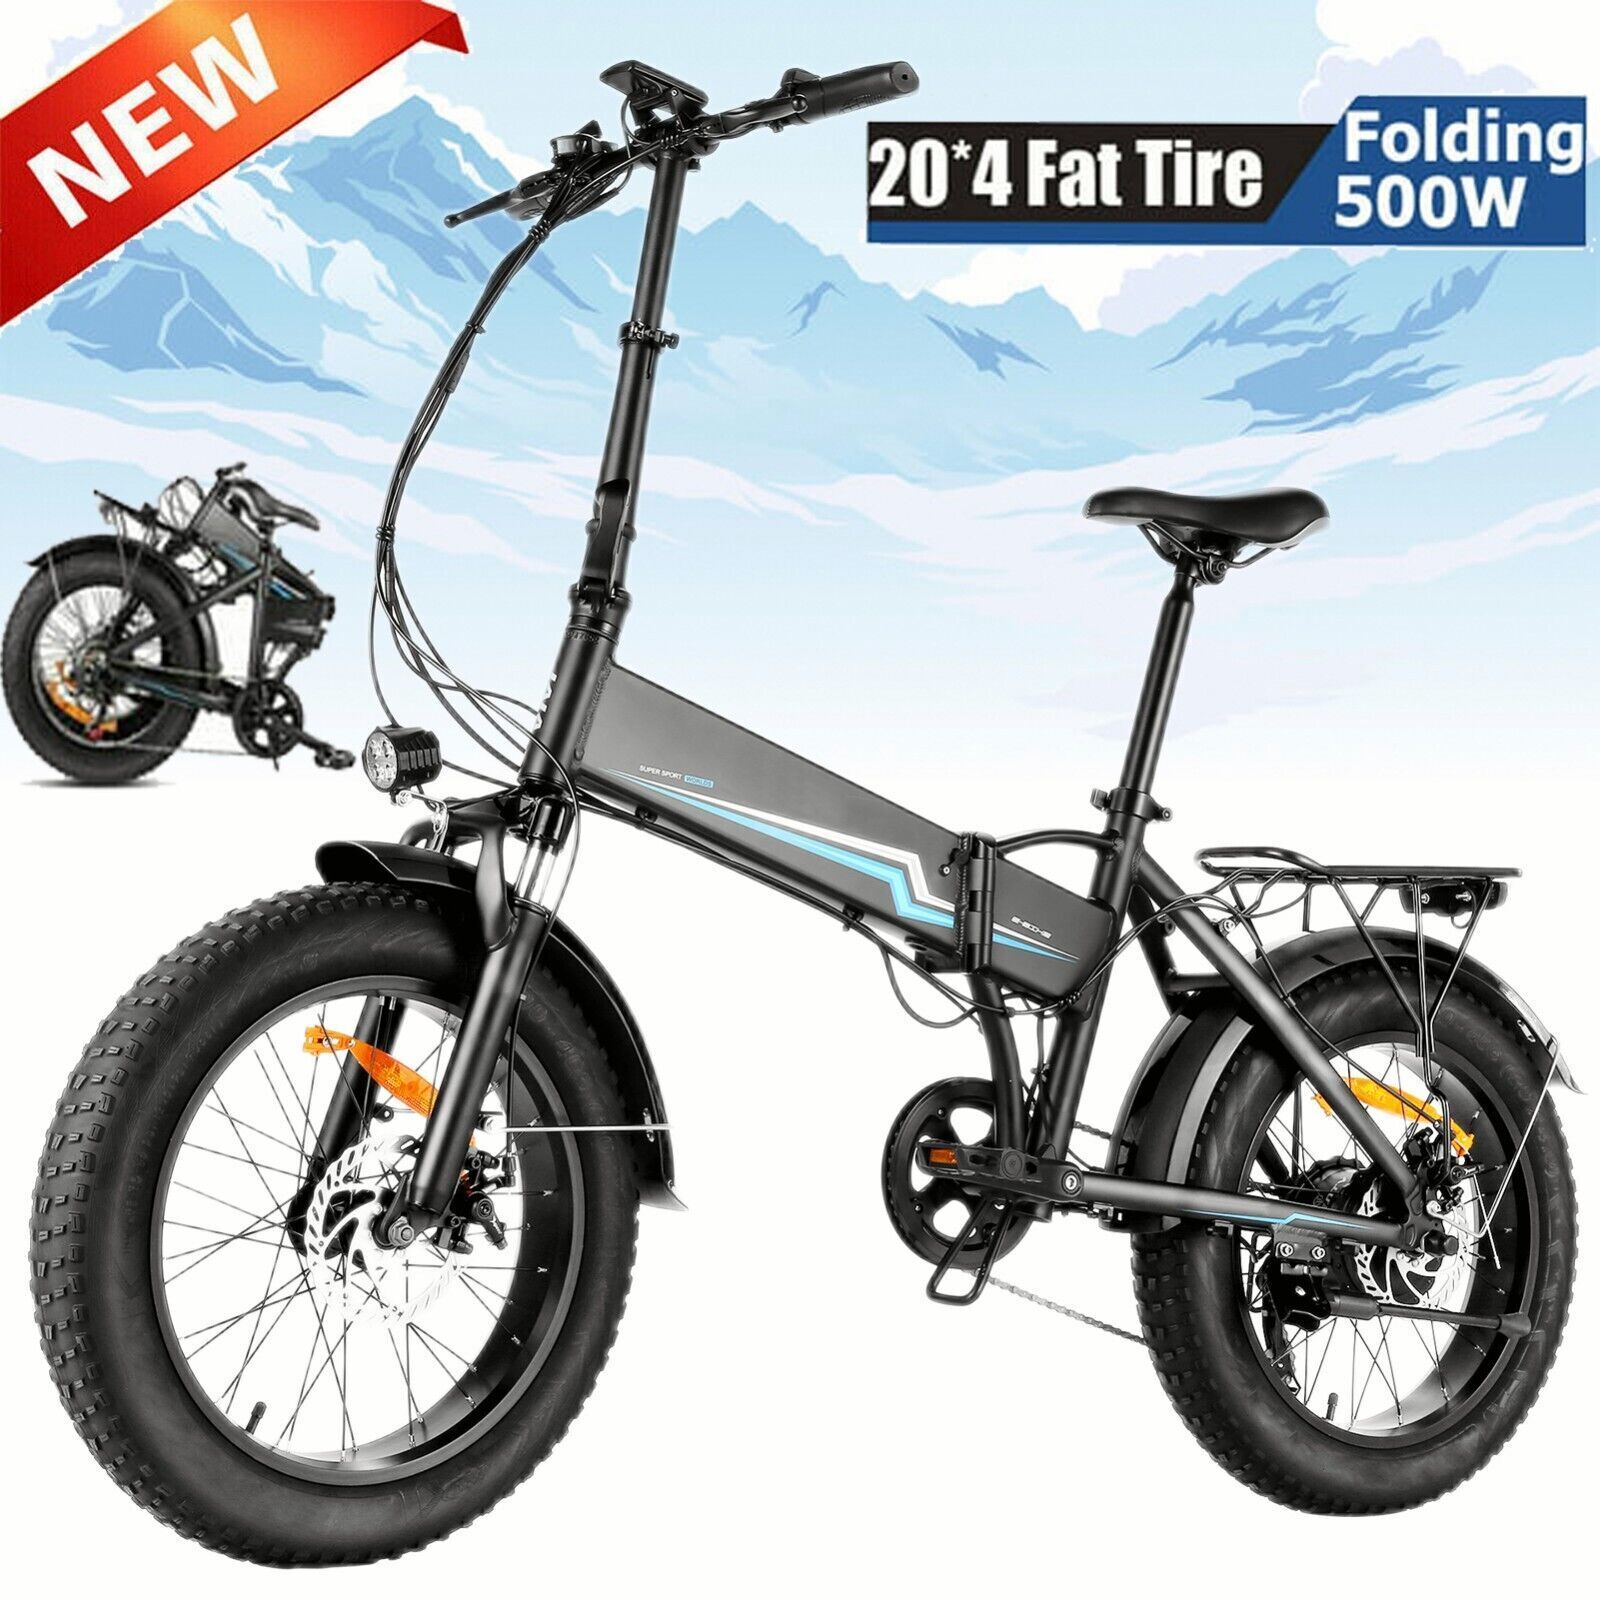 Electric Bicycle for Sale: 500W Motor Snow Beach Ebike,Electric Bike Foldable 20" x 4.0 Fat Tire r 33 d in Hacienda Heights, California